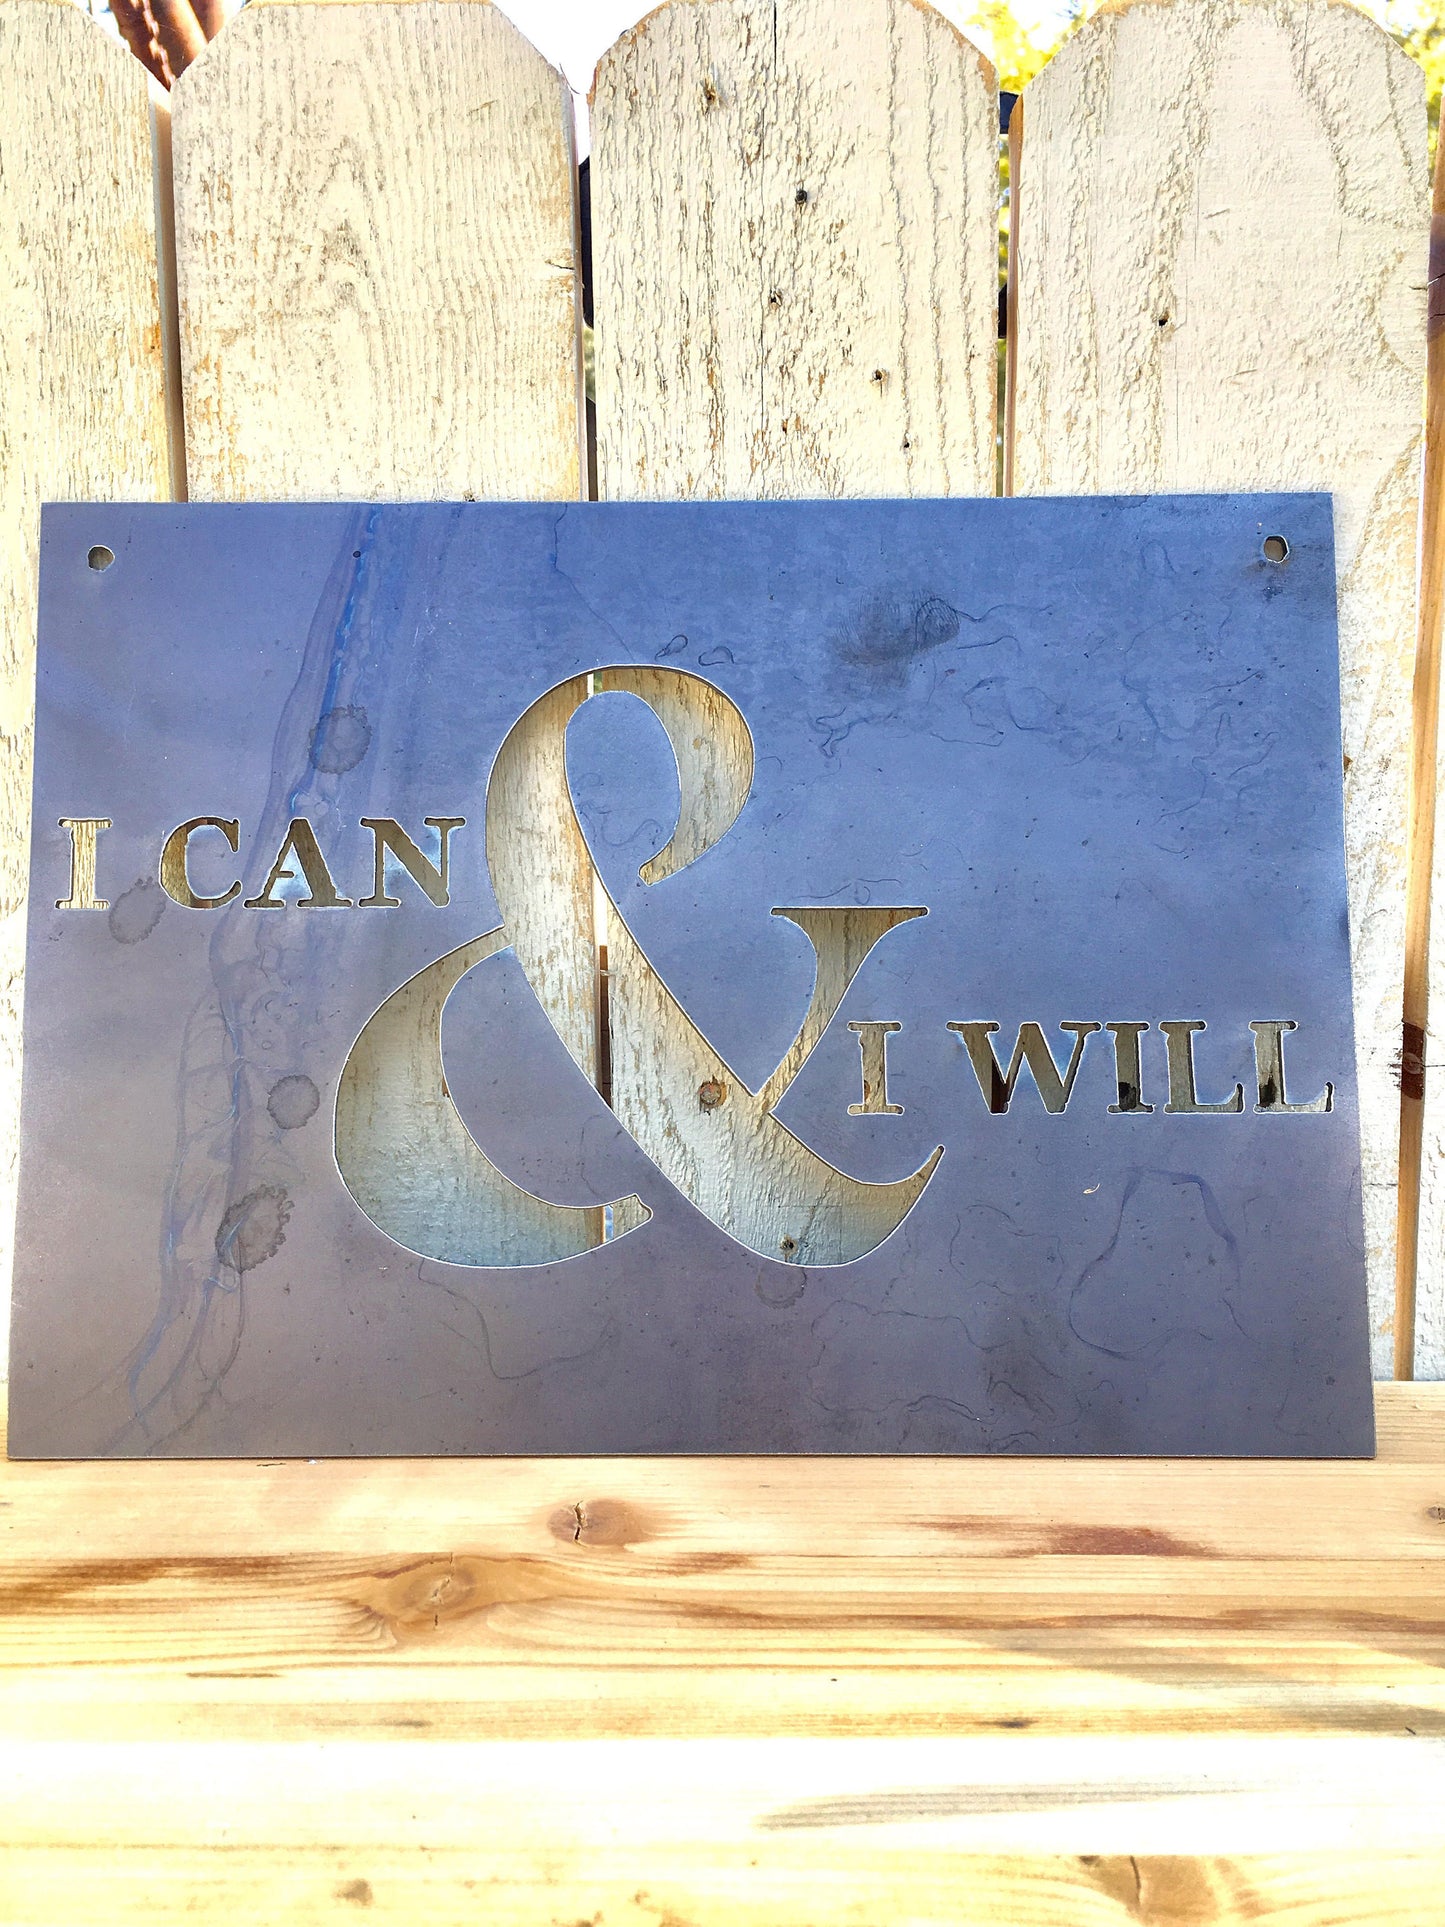 I Can & I Will Small Rectangular Metal Sign